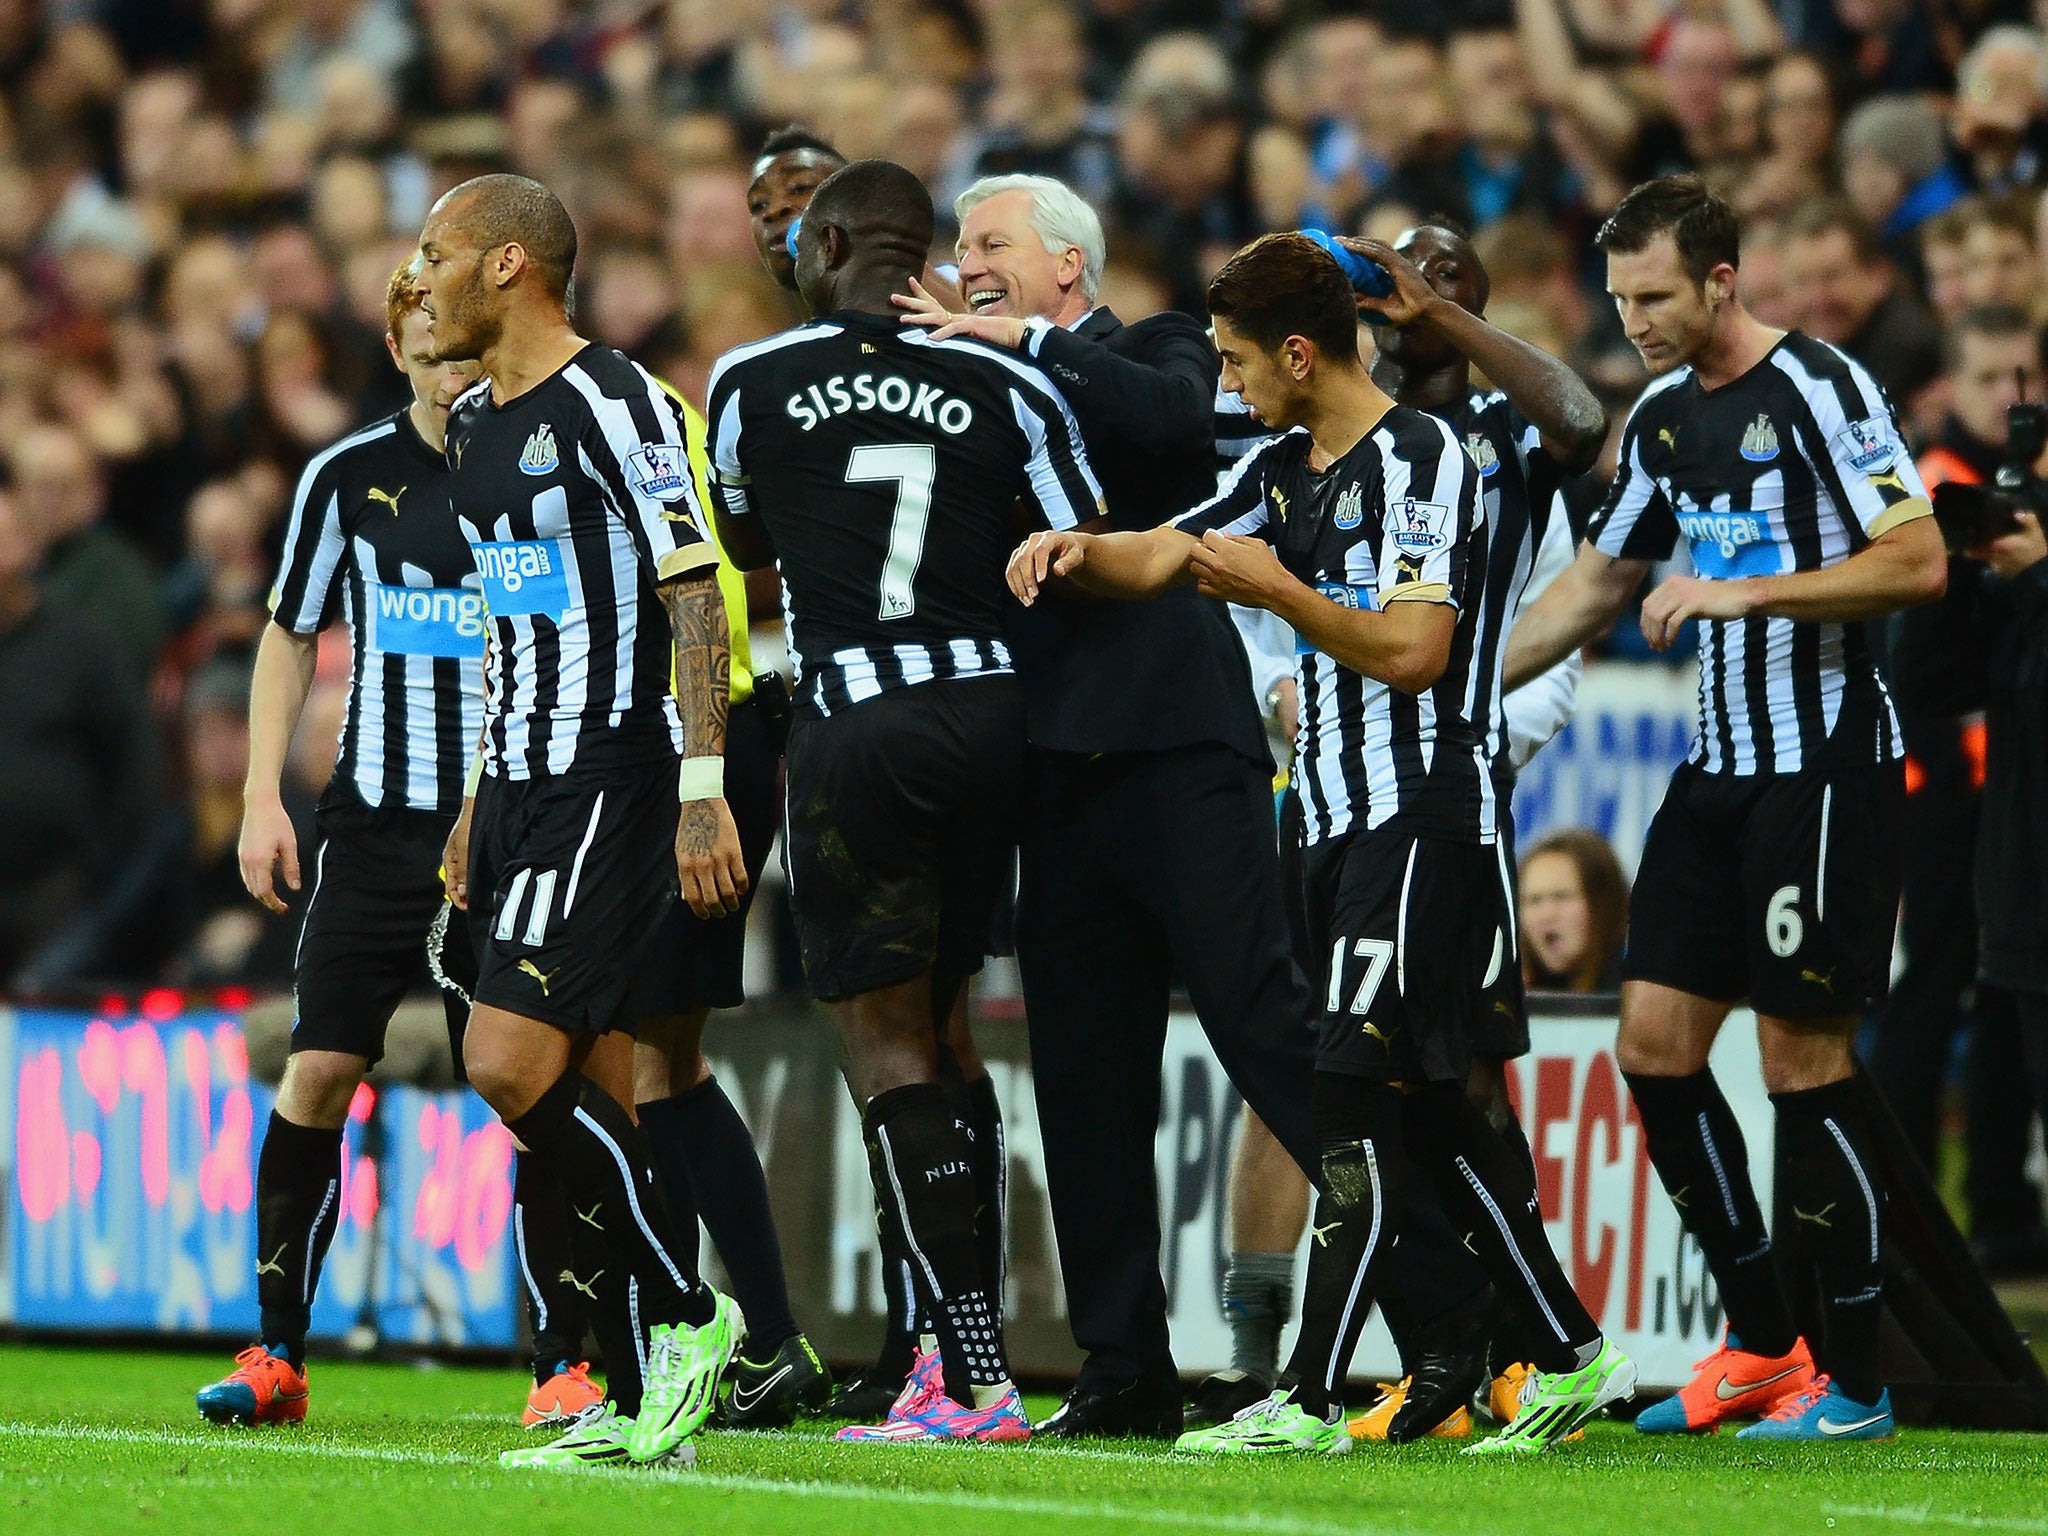 Newcastle manager Alan Pardew celebrates with his team after Moussa Sissoko scores against QPR